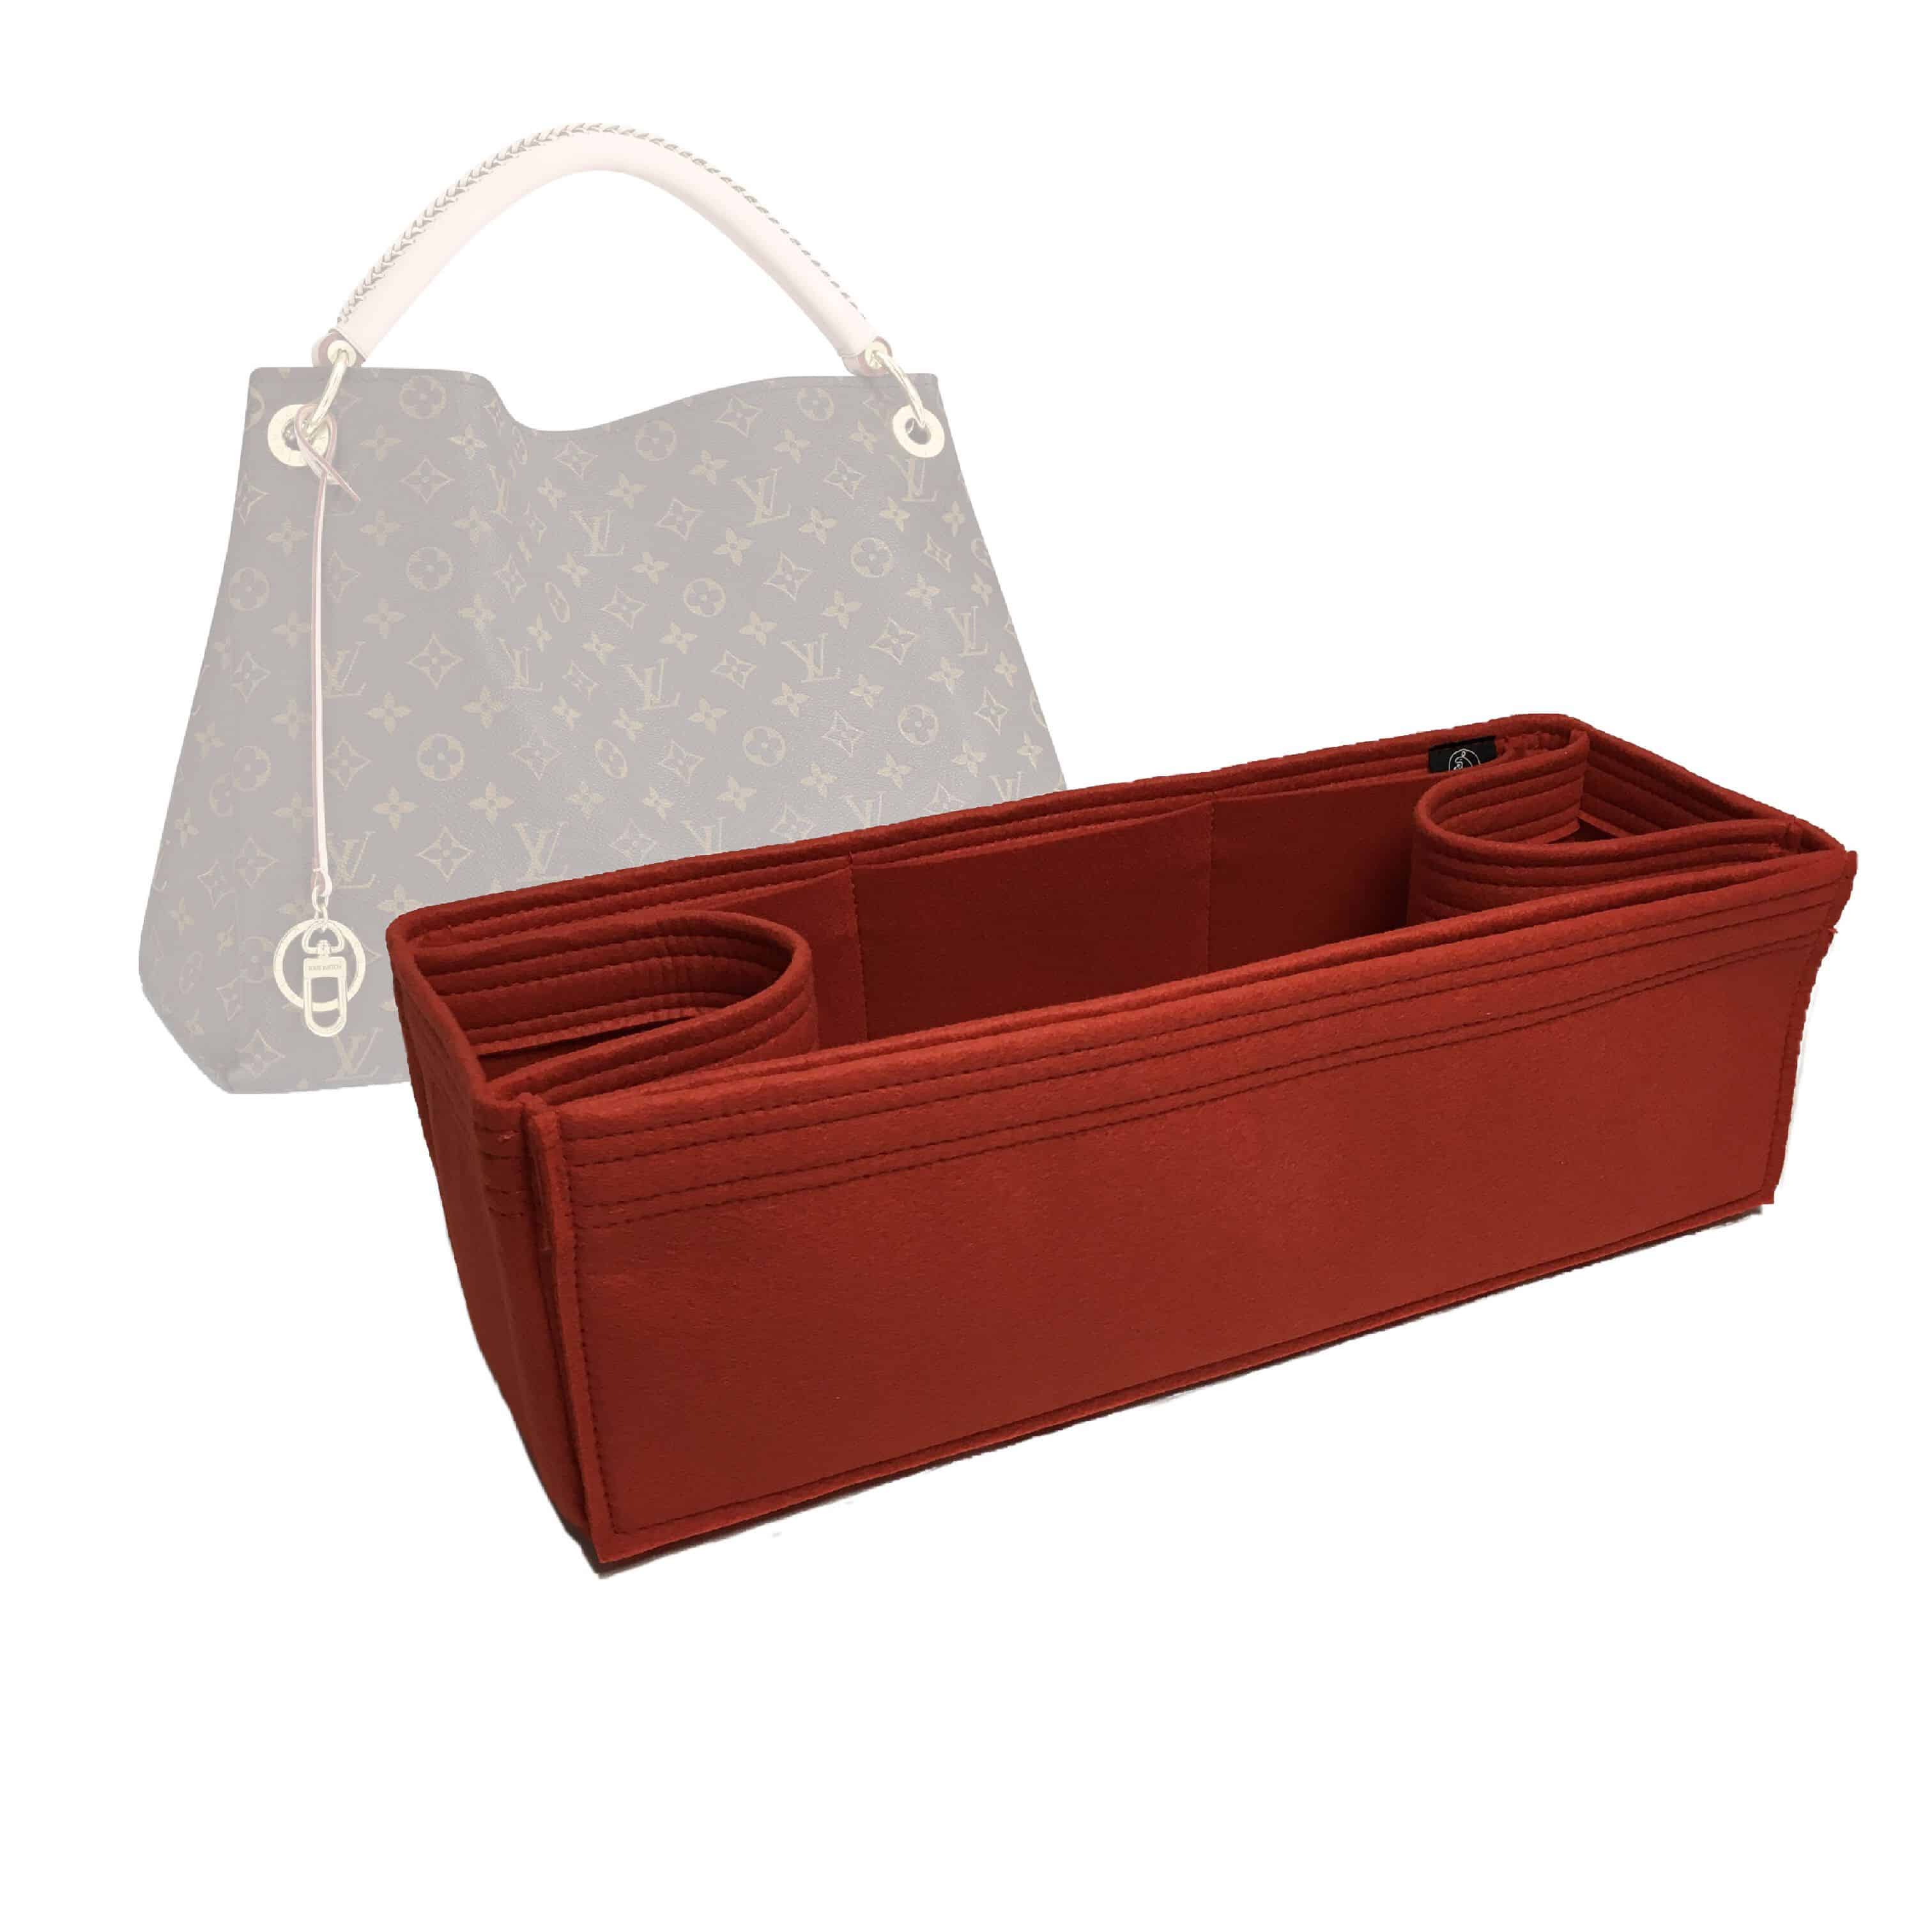 LV Artsy MM (High, stand up the bag) Organizer